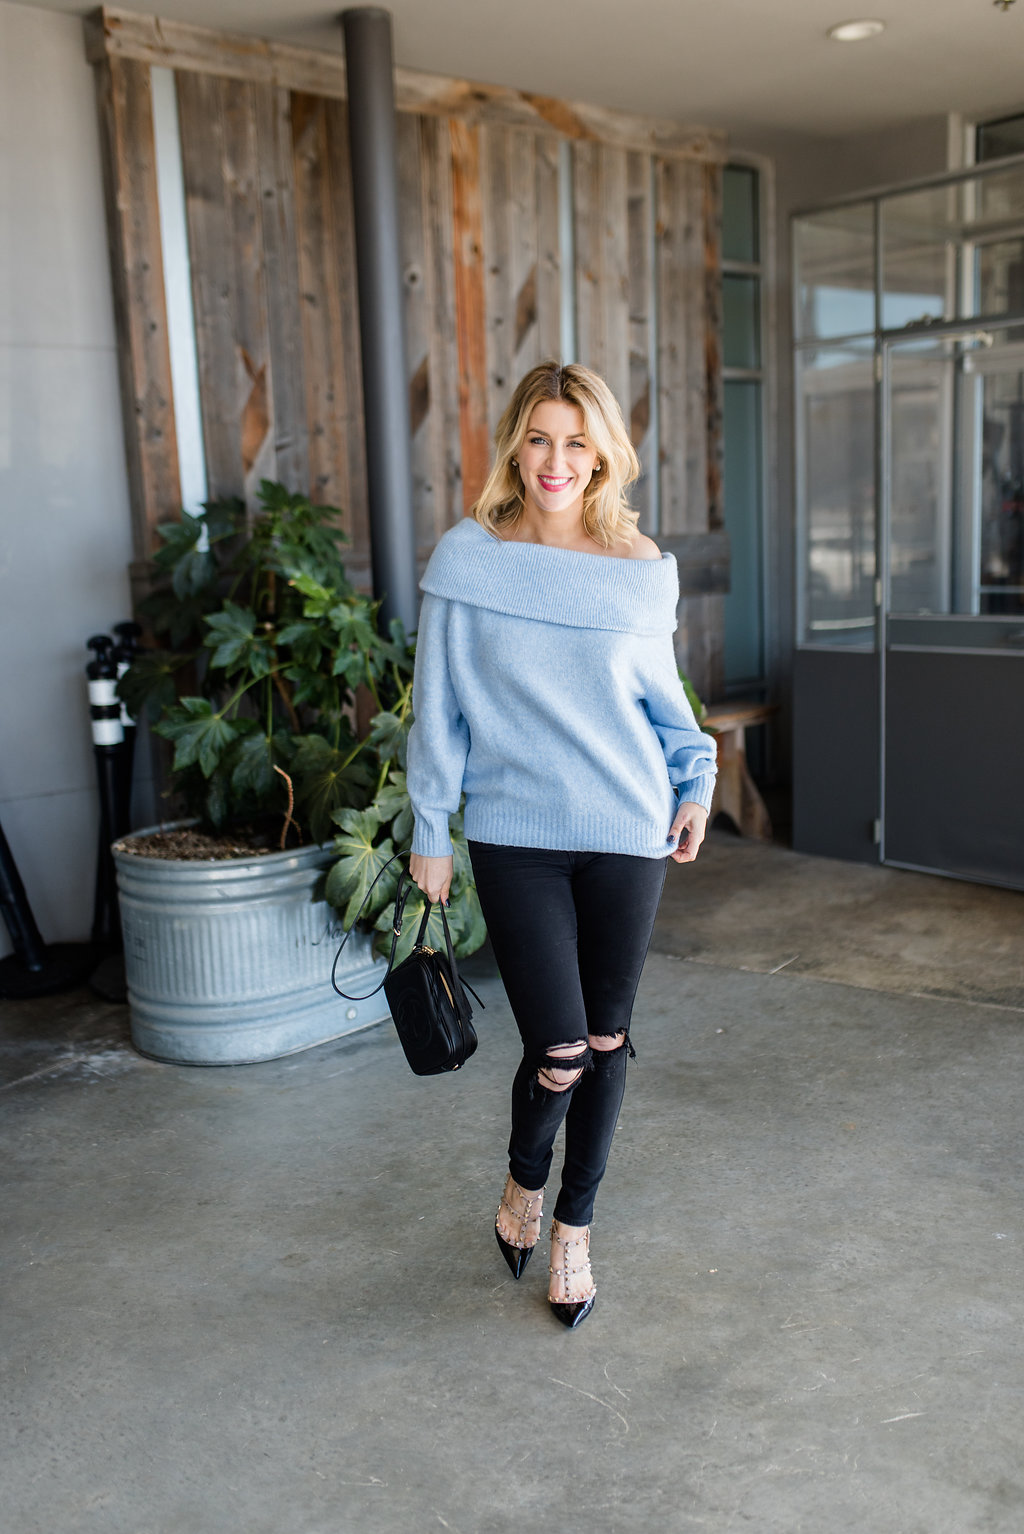 Chilly Spring Morning Brunch Sweater 